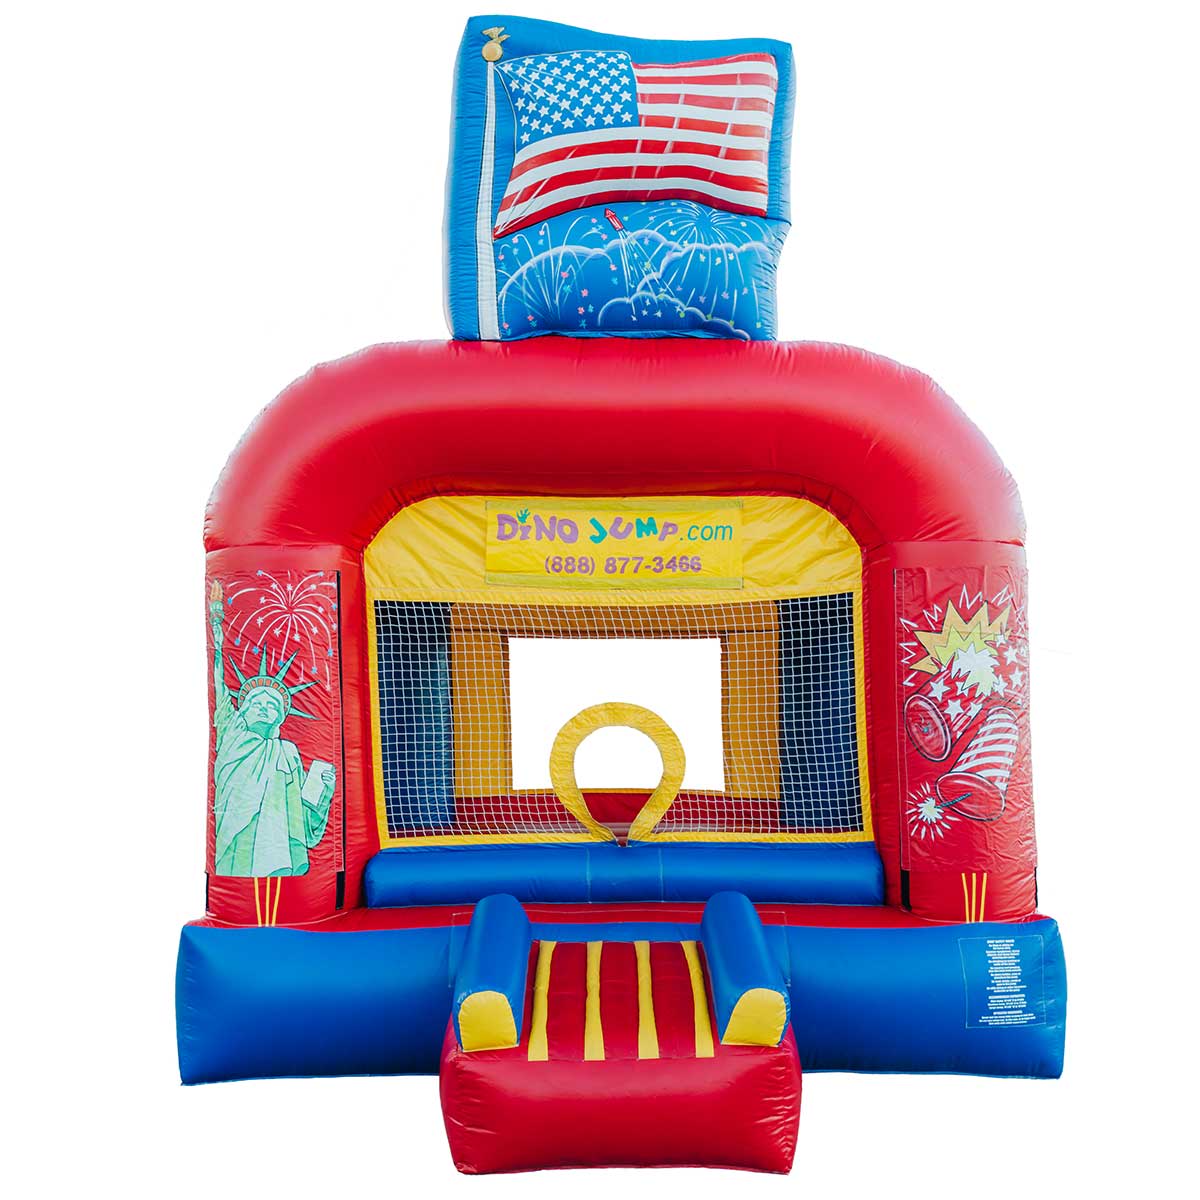 2 IN 1 SONIC THE HEDGEHOG BOUNCE HOUSE Party Inflatable - Bounce